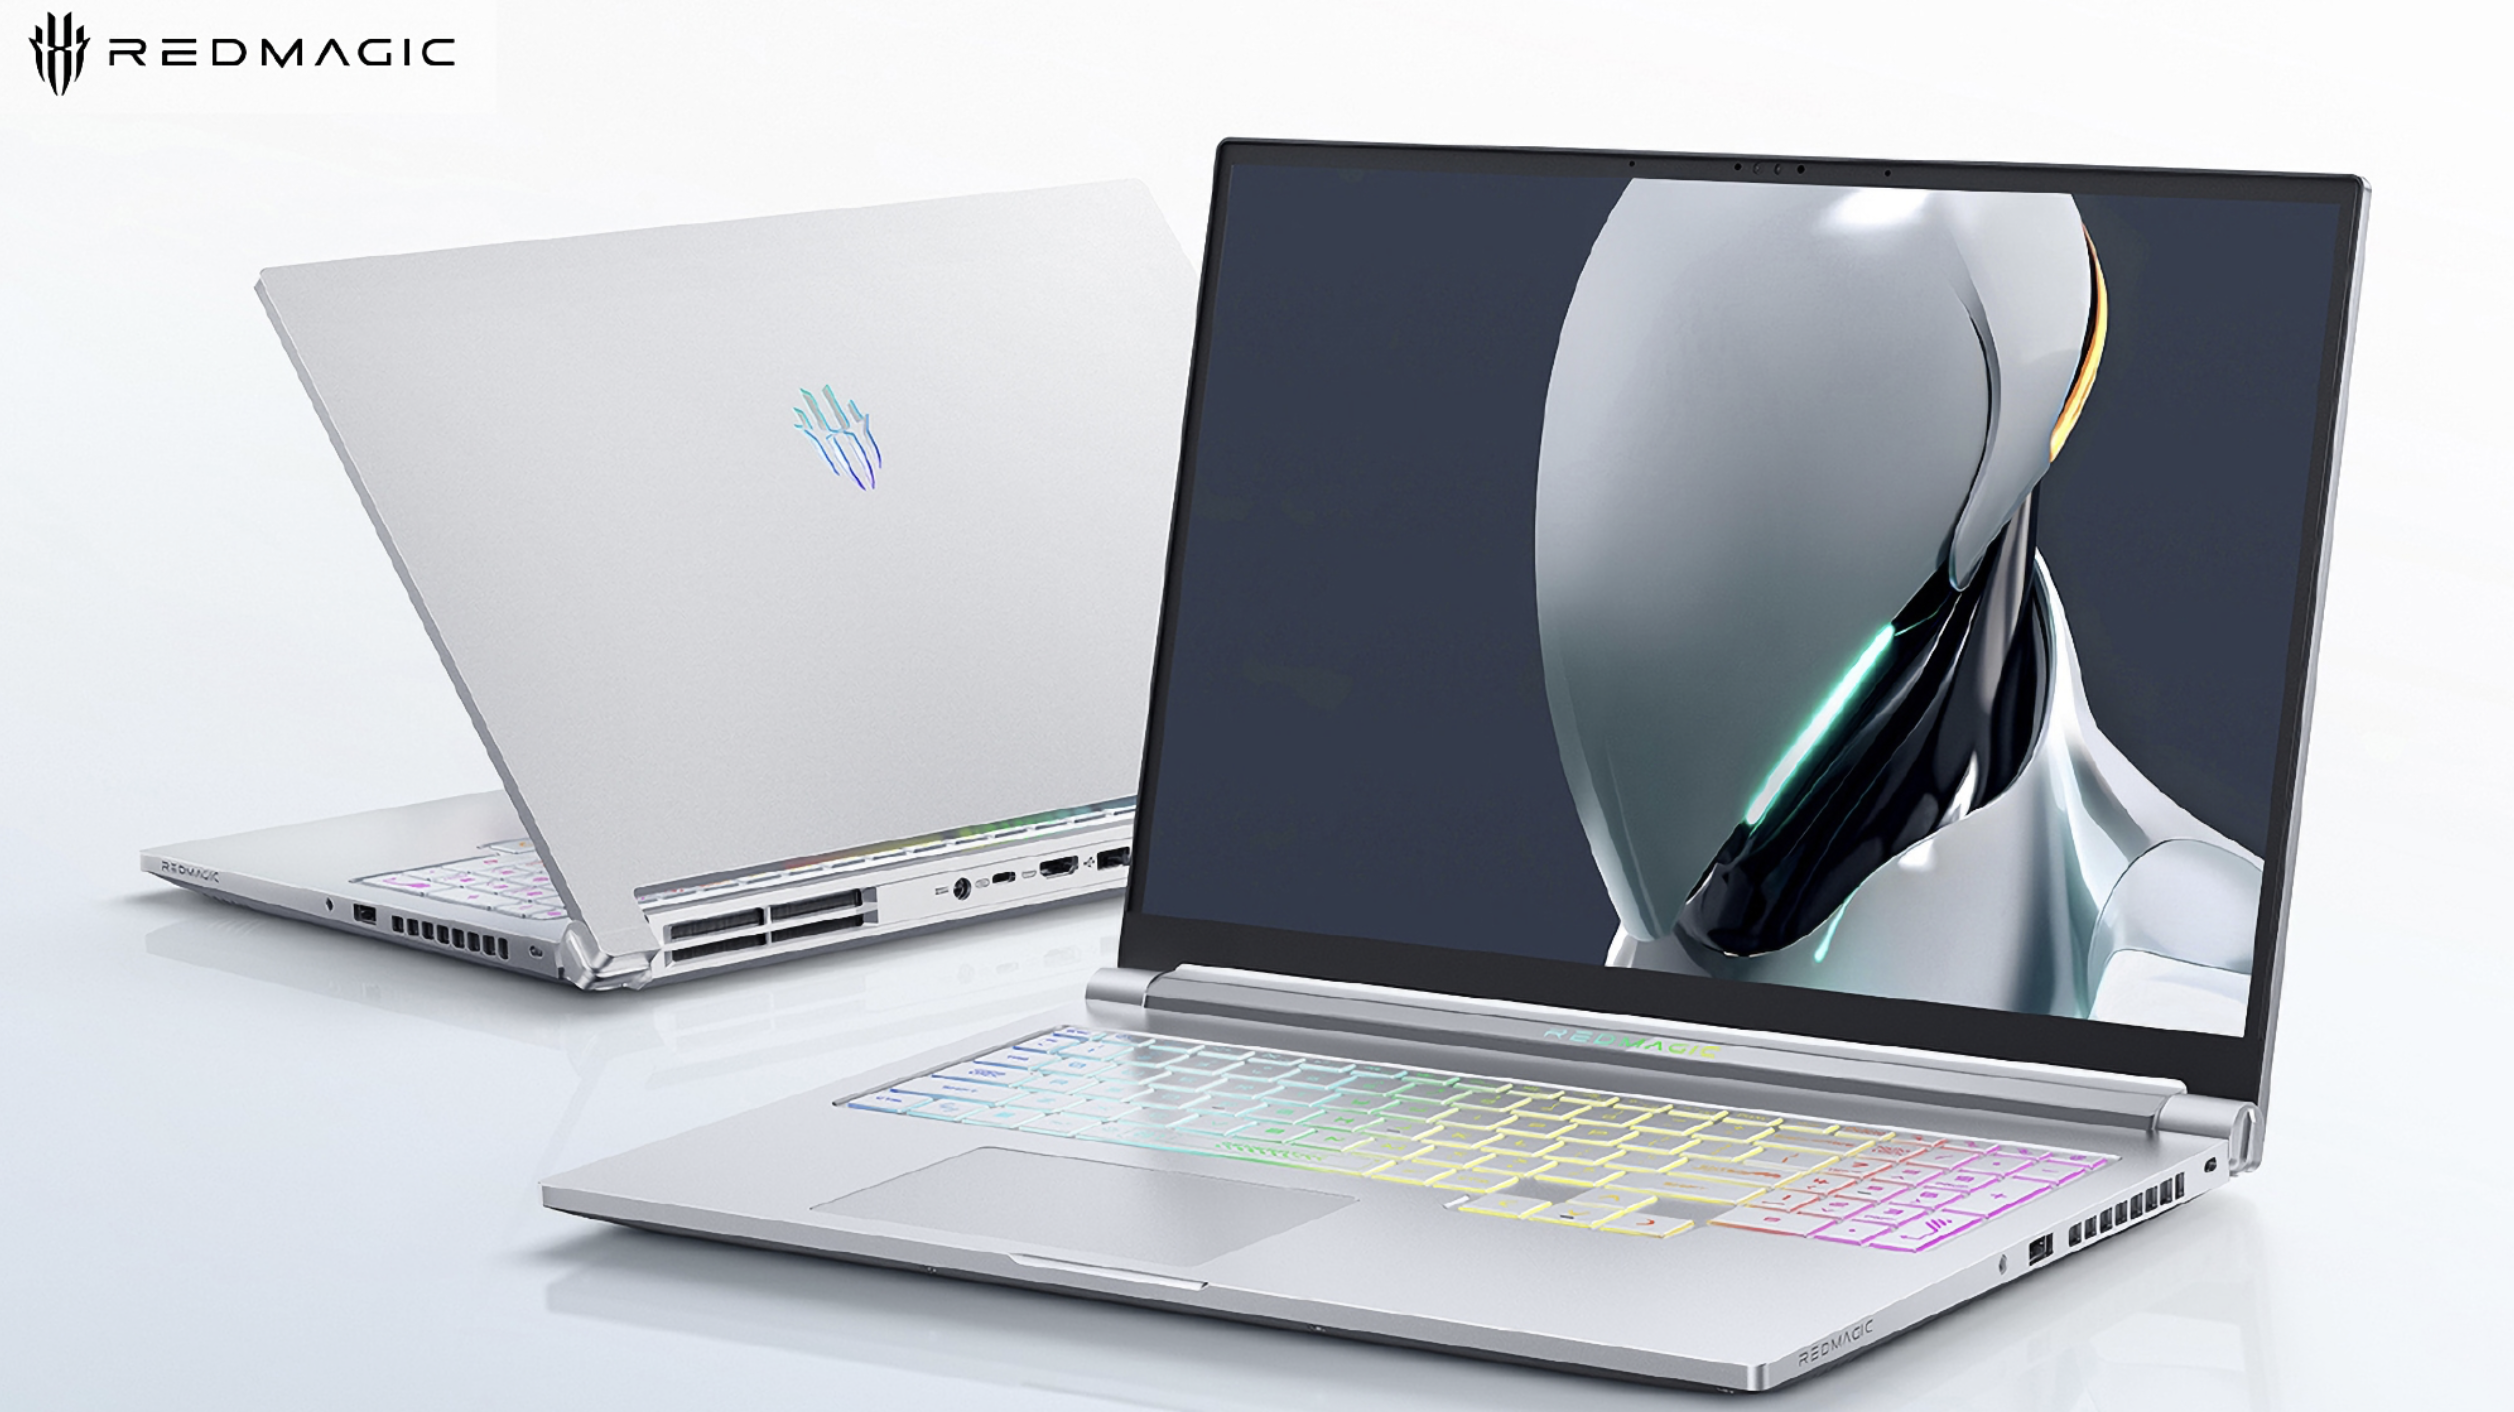 nubia has unveiled a new version of Red Magic 16 Pro Gaming Laptop in Glacier Silver colour